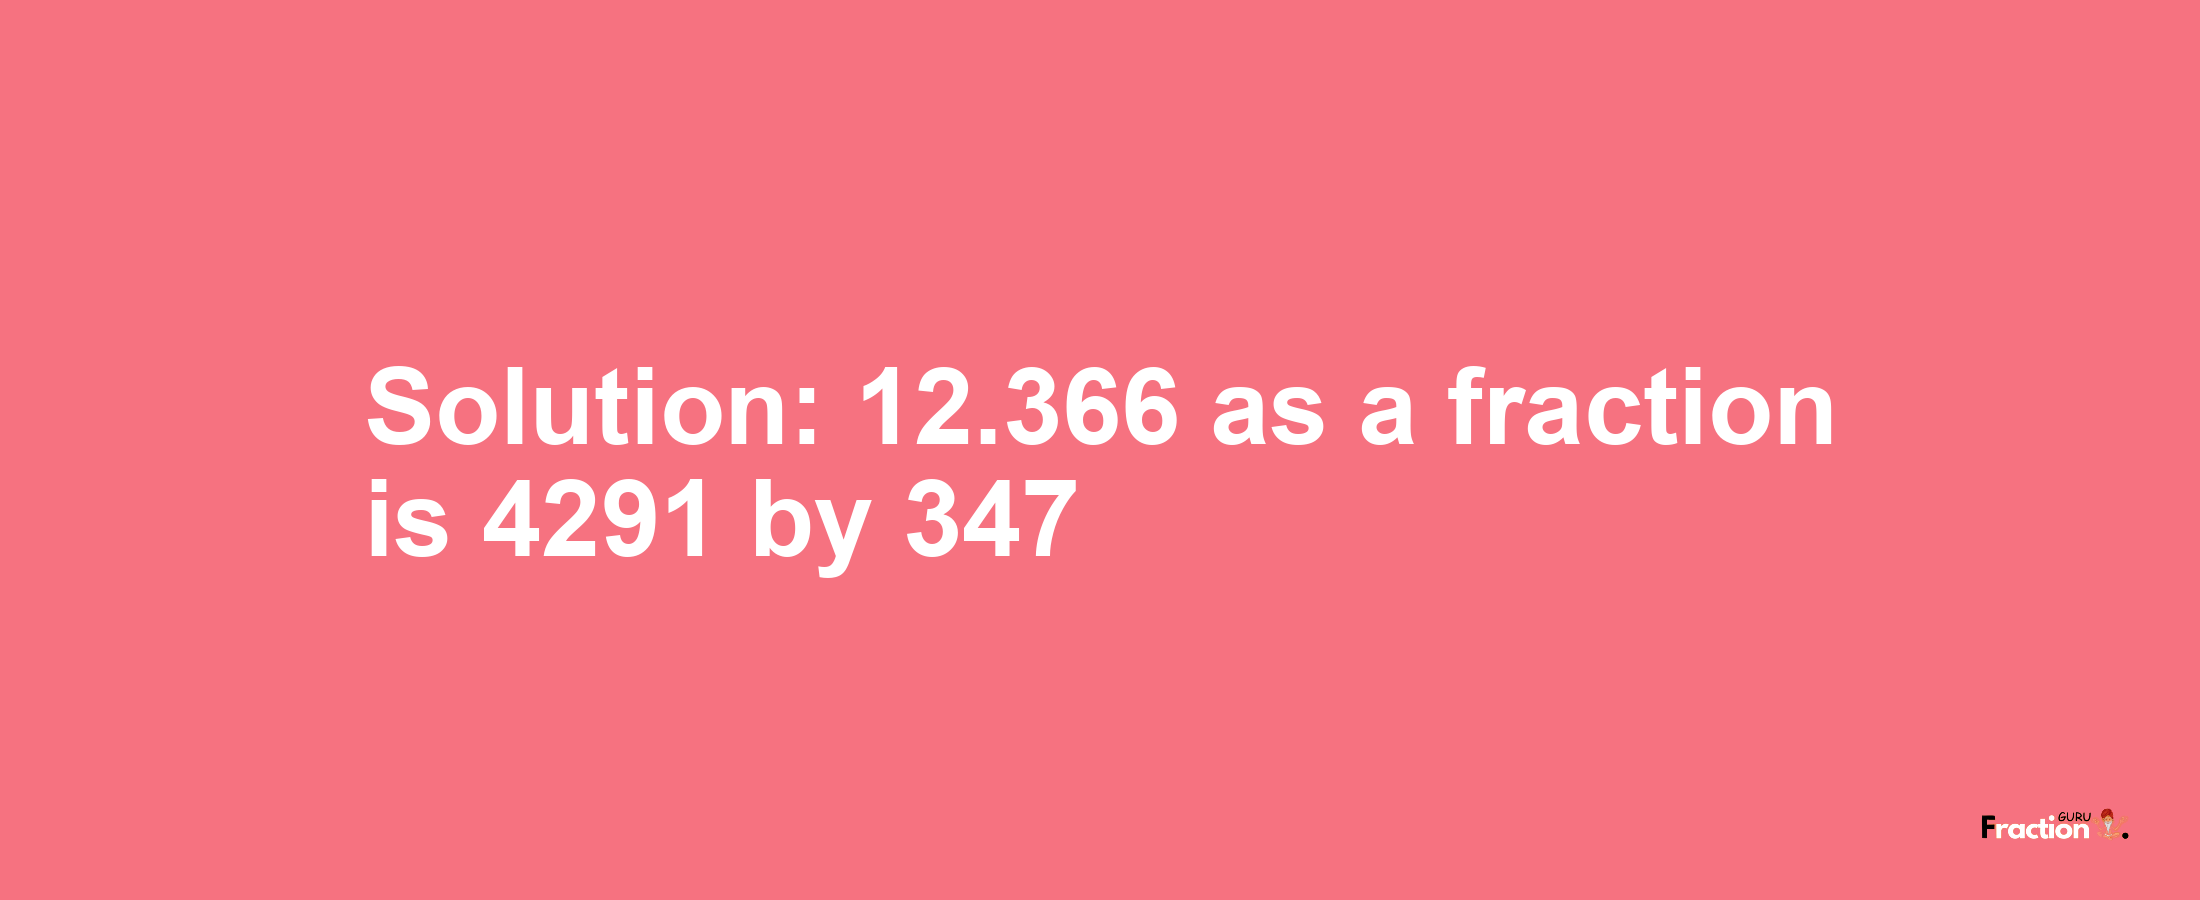 Solution:12.366 as a fraction is 4291/347